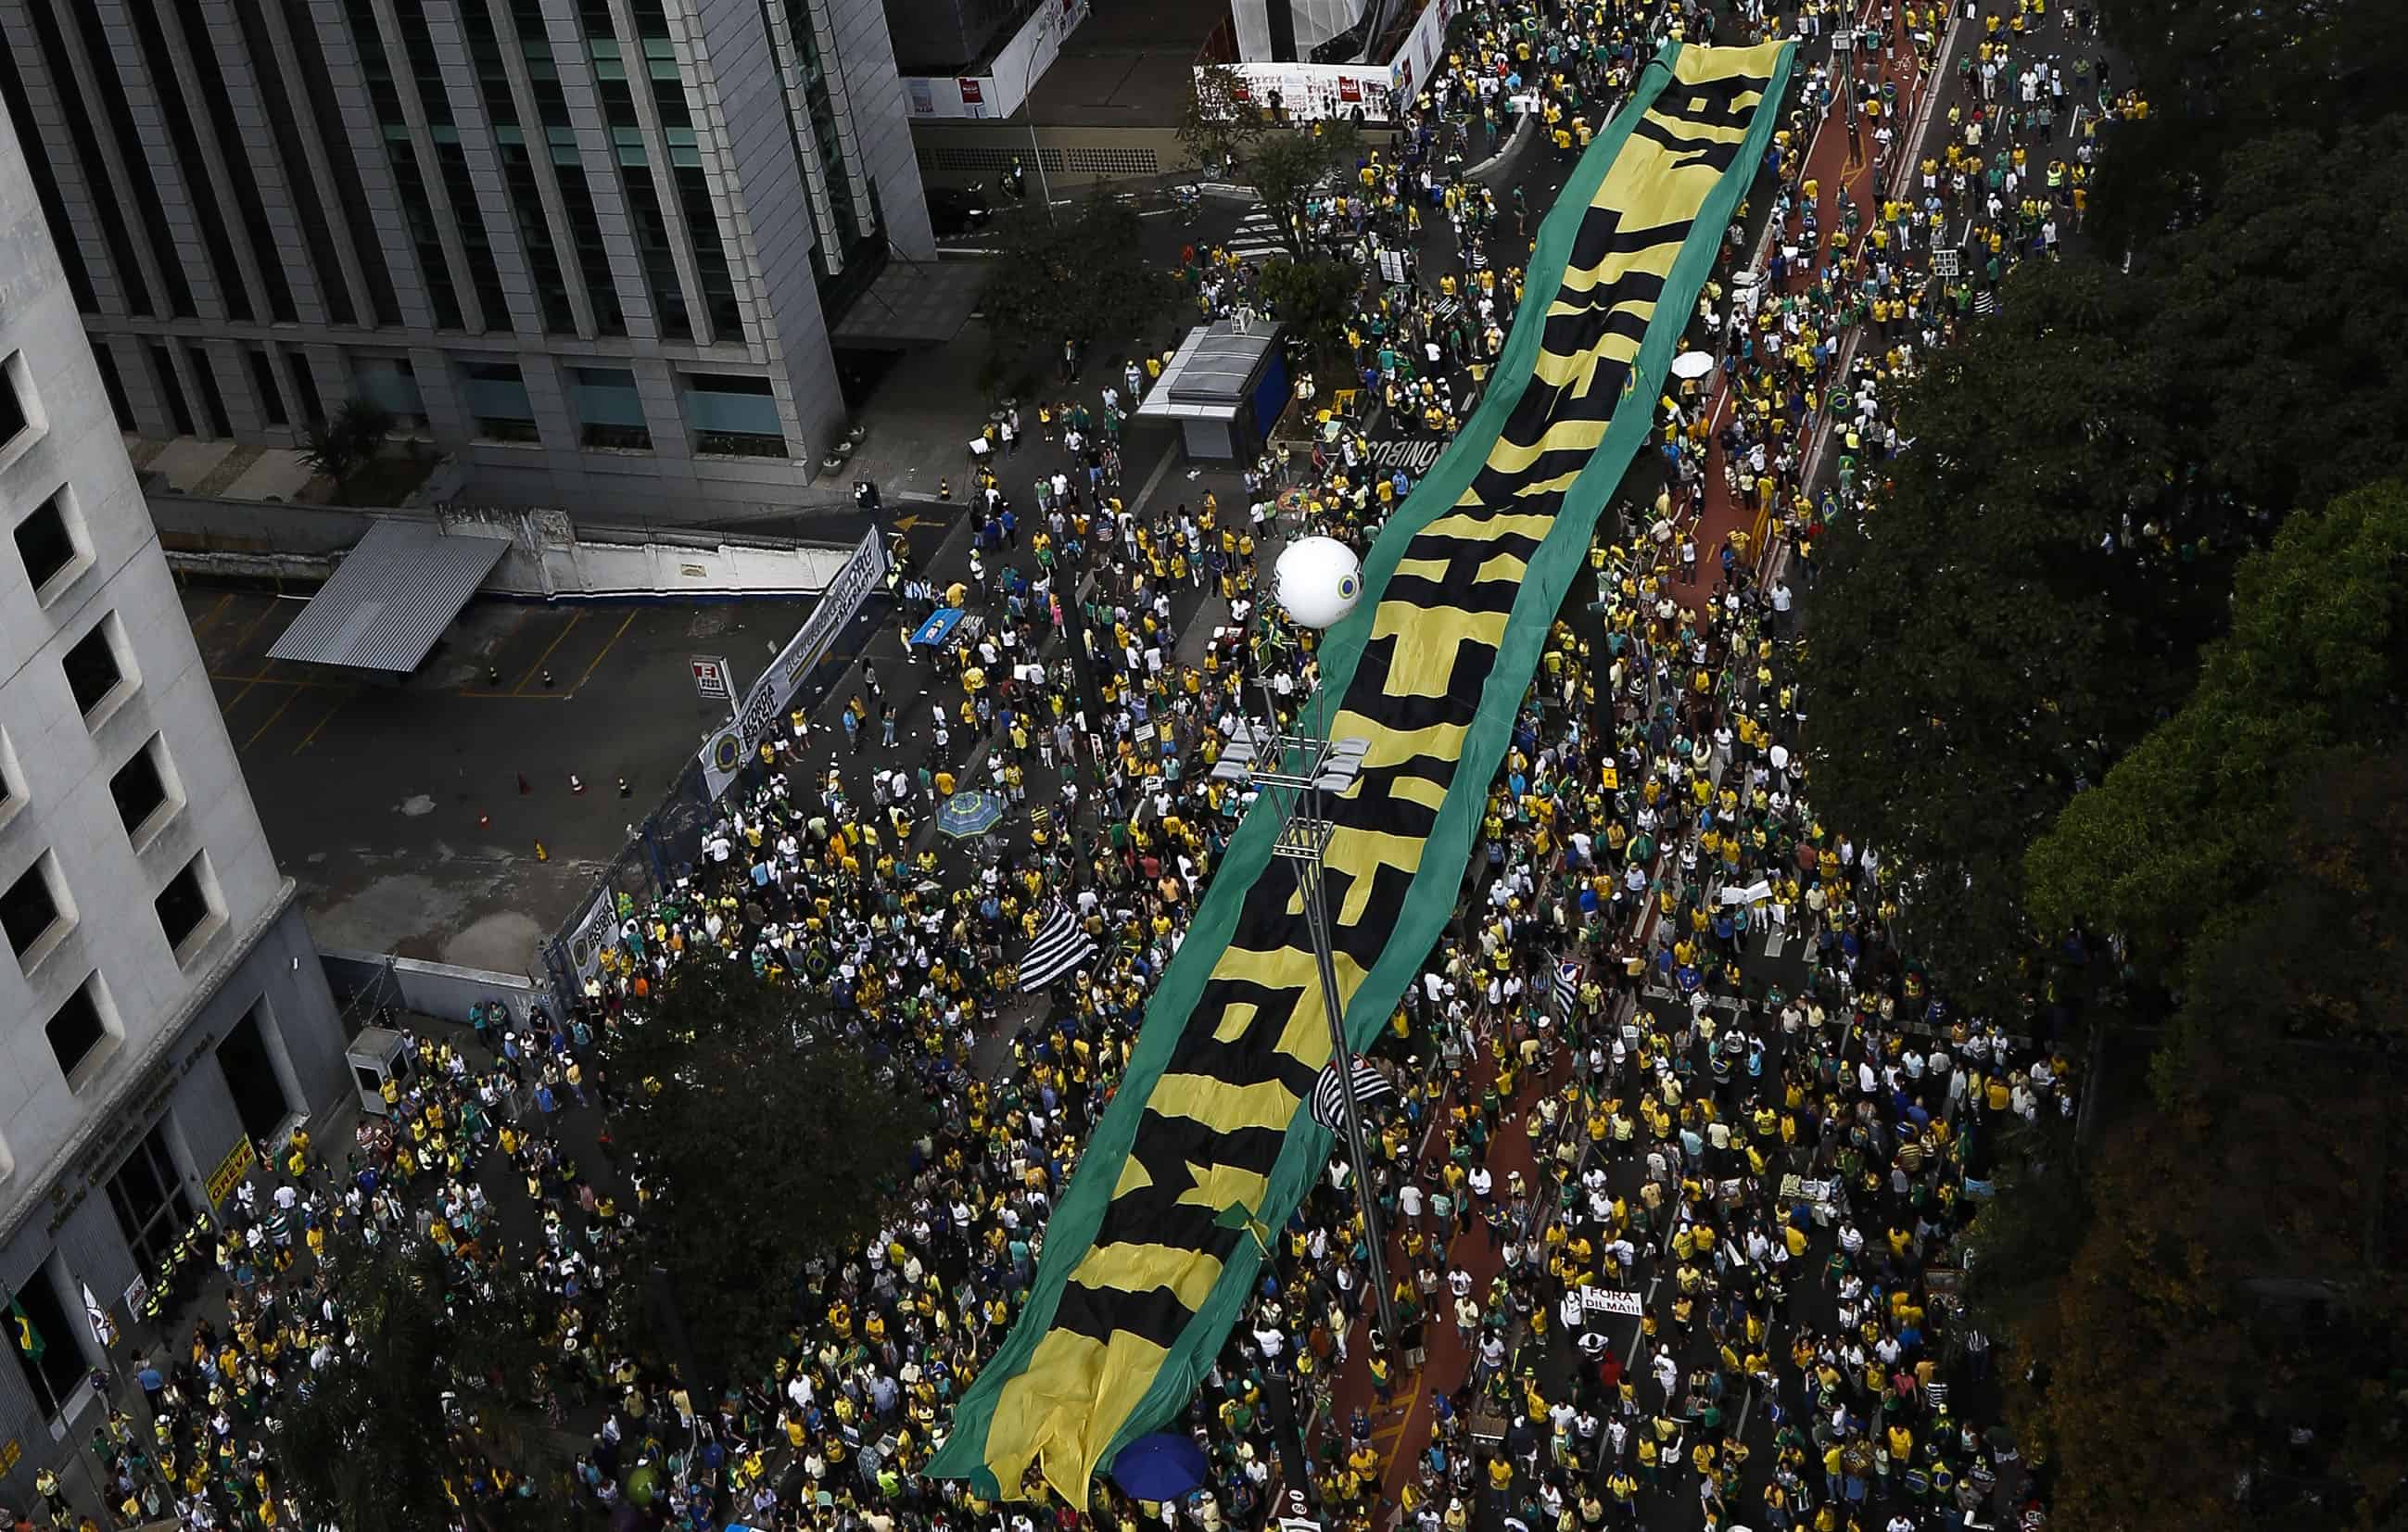 Demonstrators protest against Brazilian President Dilma Rousseff and the ruling Workers Party (PT), at Paulista Avenue in Sao Paulo, Brazil on August 16, 2015.